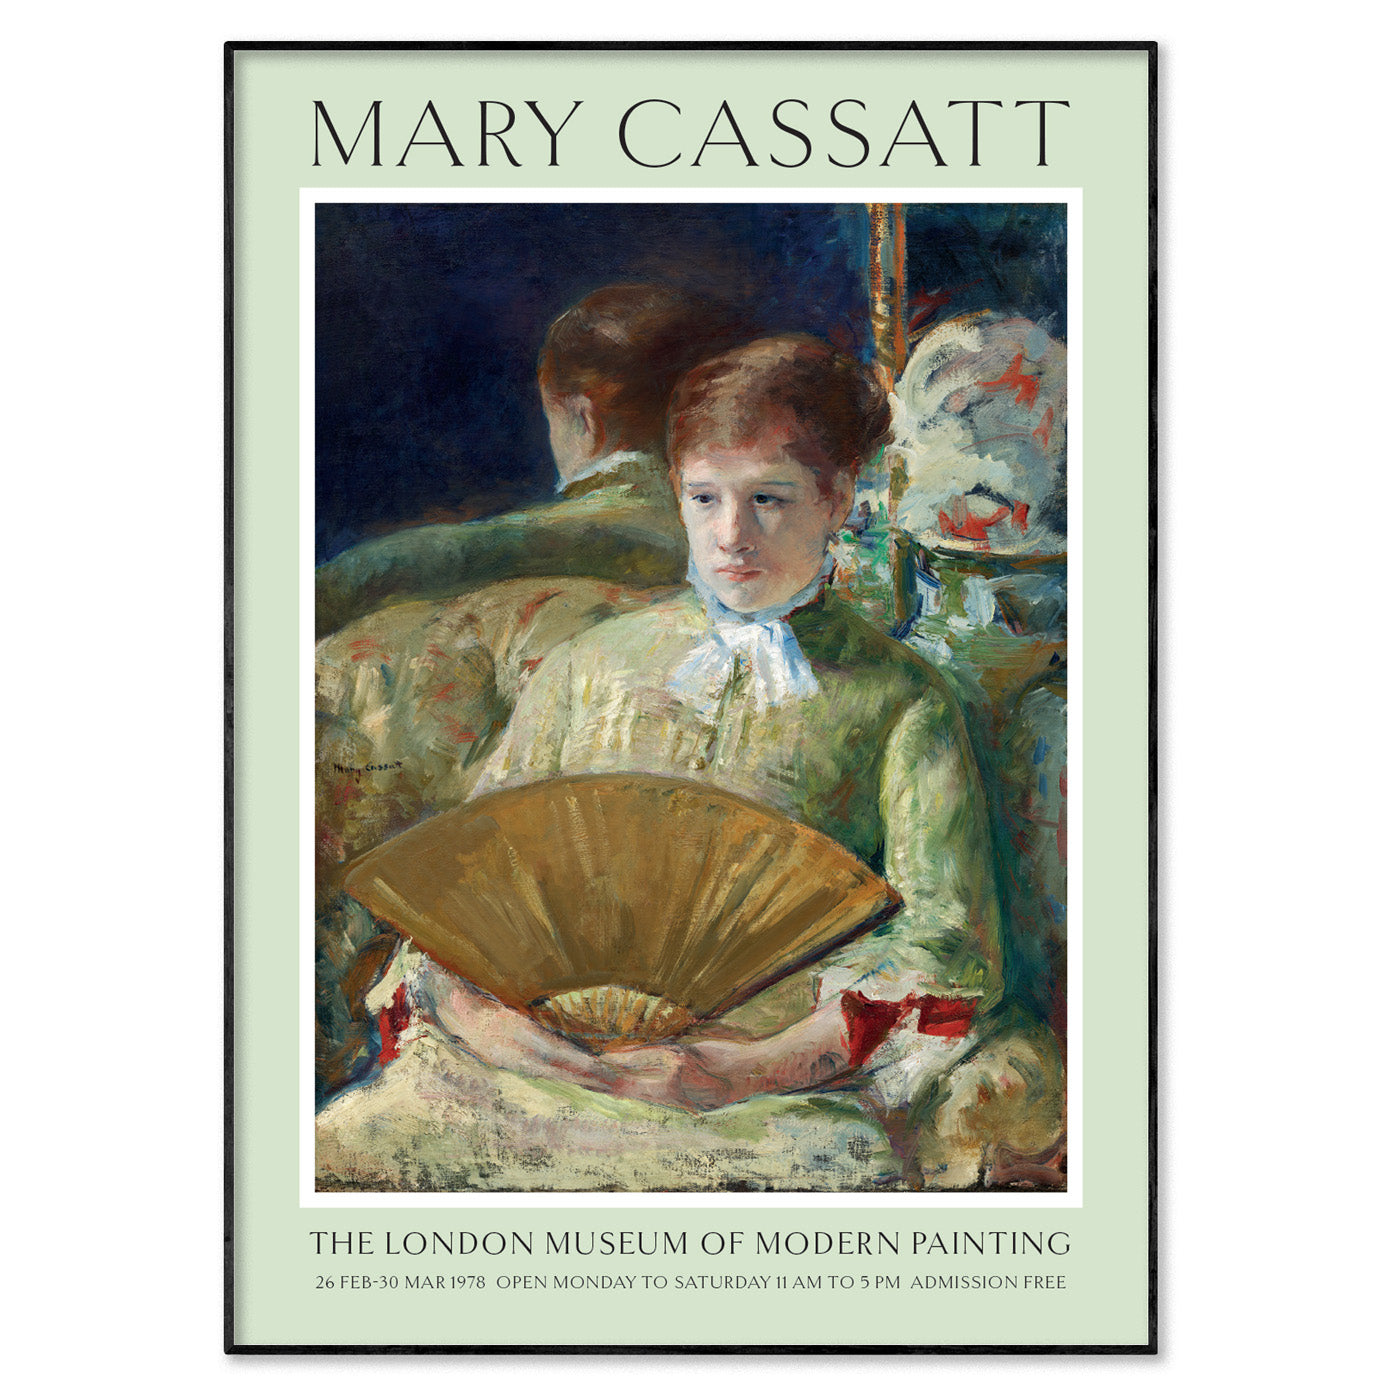 Mary Cassatt 'Woman With A Fan' 1878 Exhibition Poster